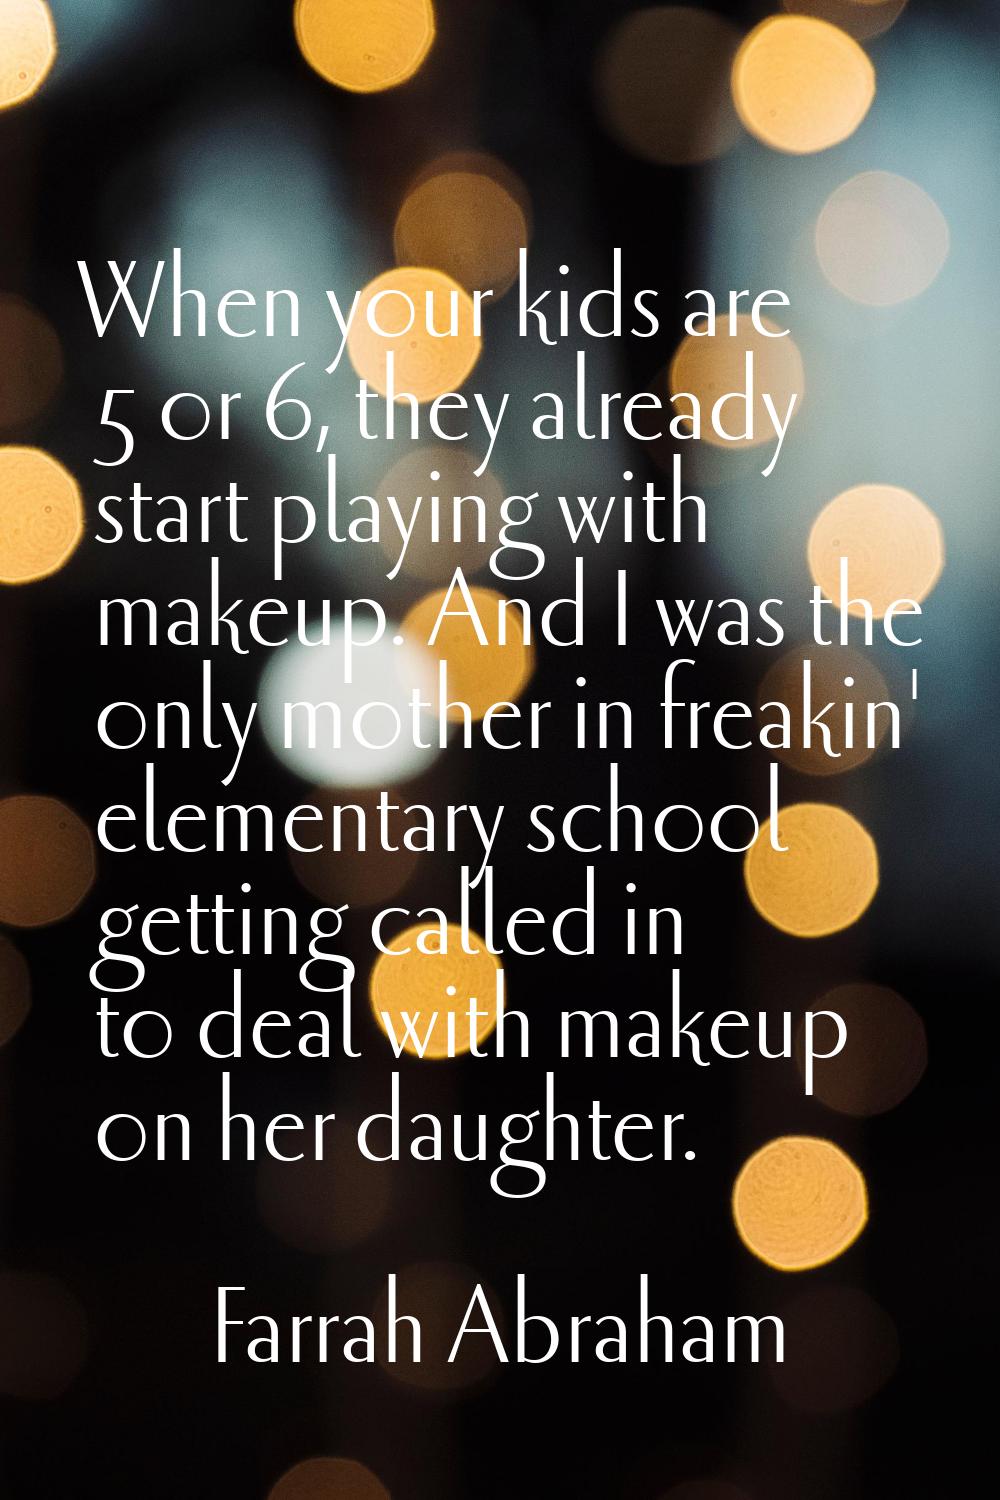 When your kids are 5 or 6, they already start playing with makeup. And I was the only mother in fre